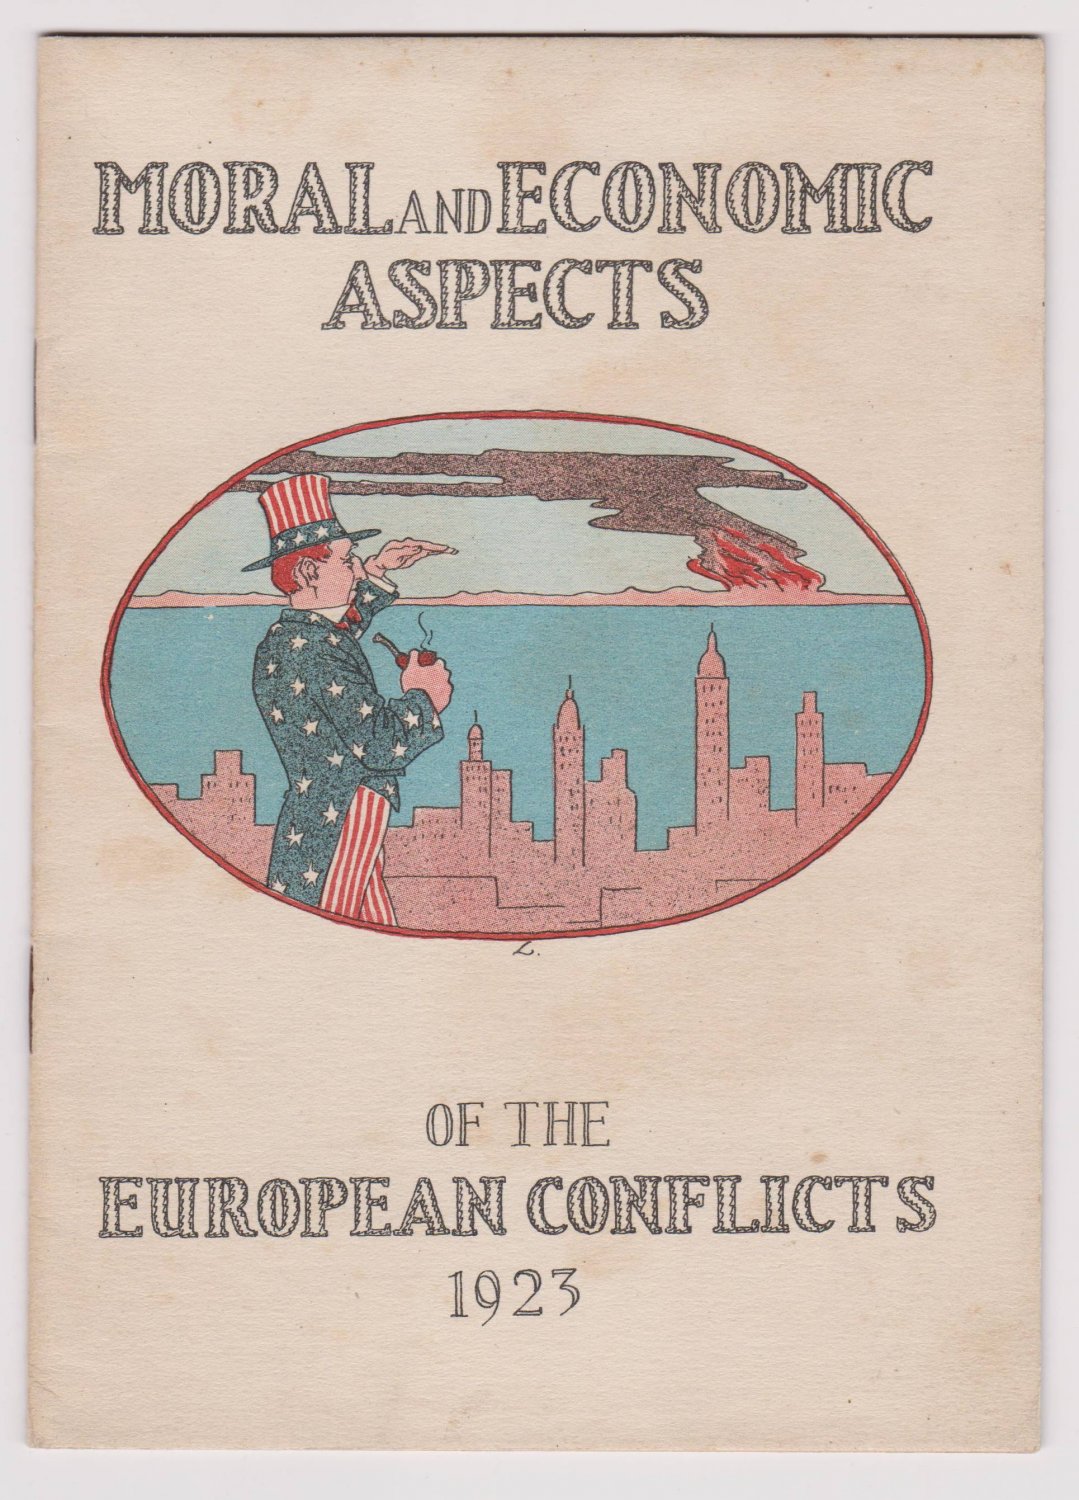 Moral and Economic Aspects of the European Conflicts.